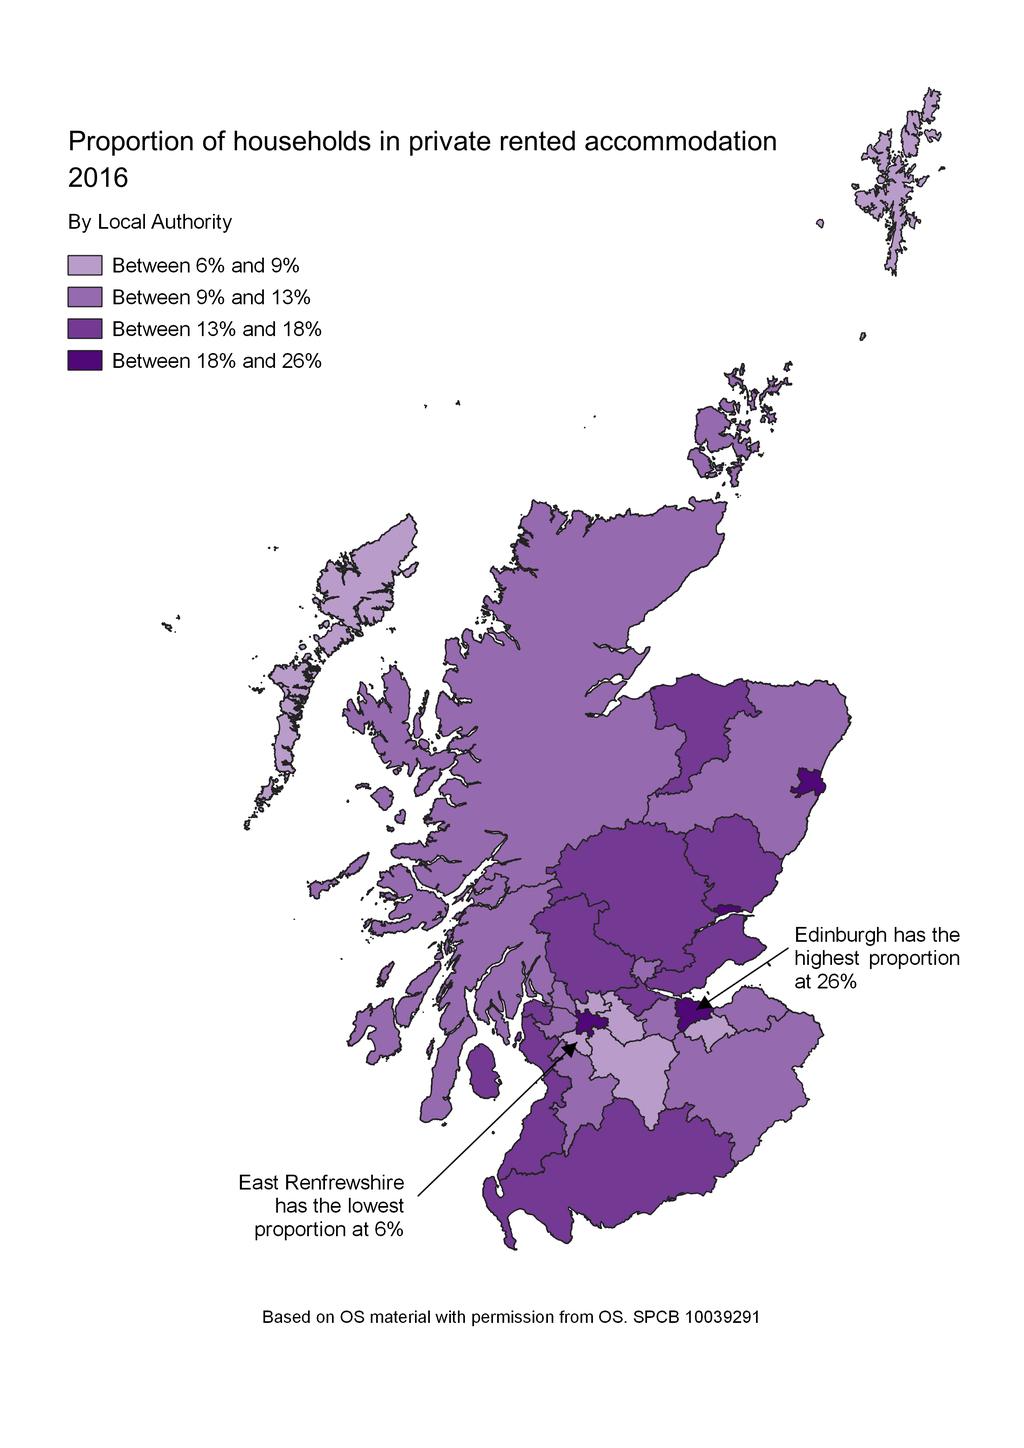 Figure 2: Proportion of households in private rented